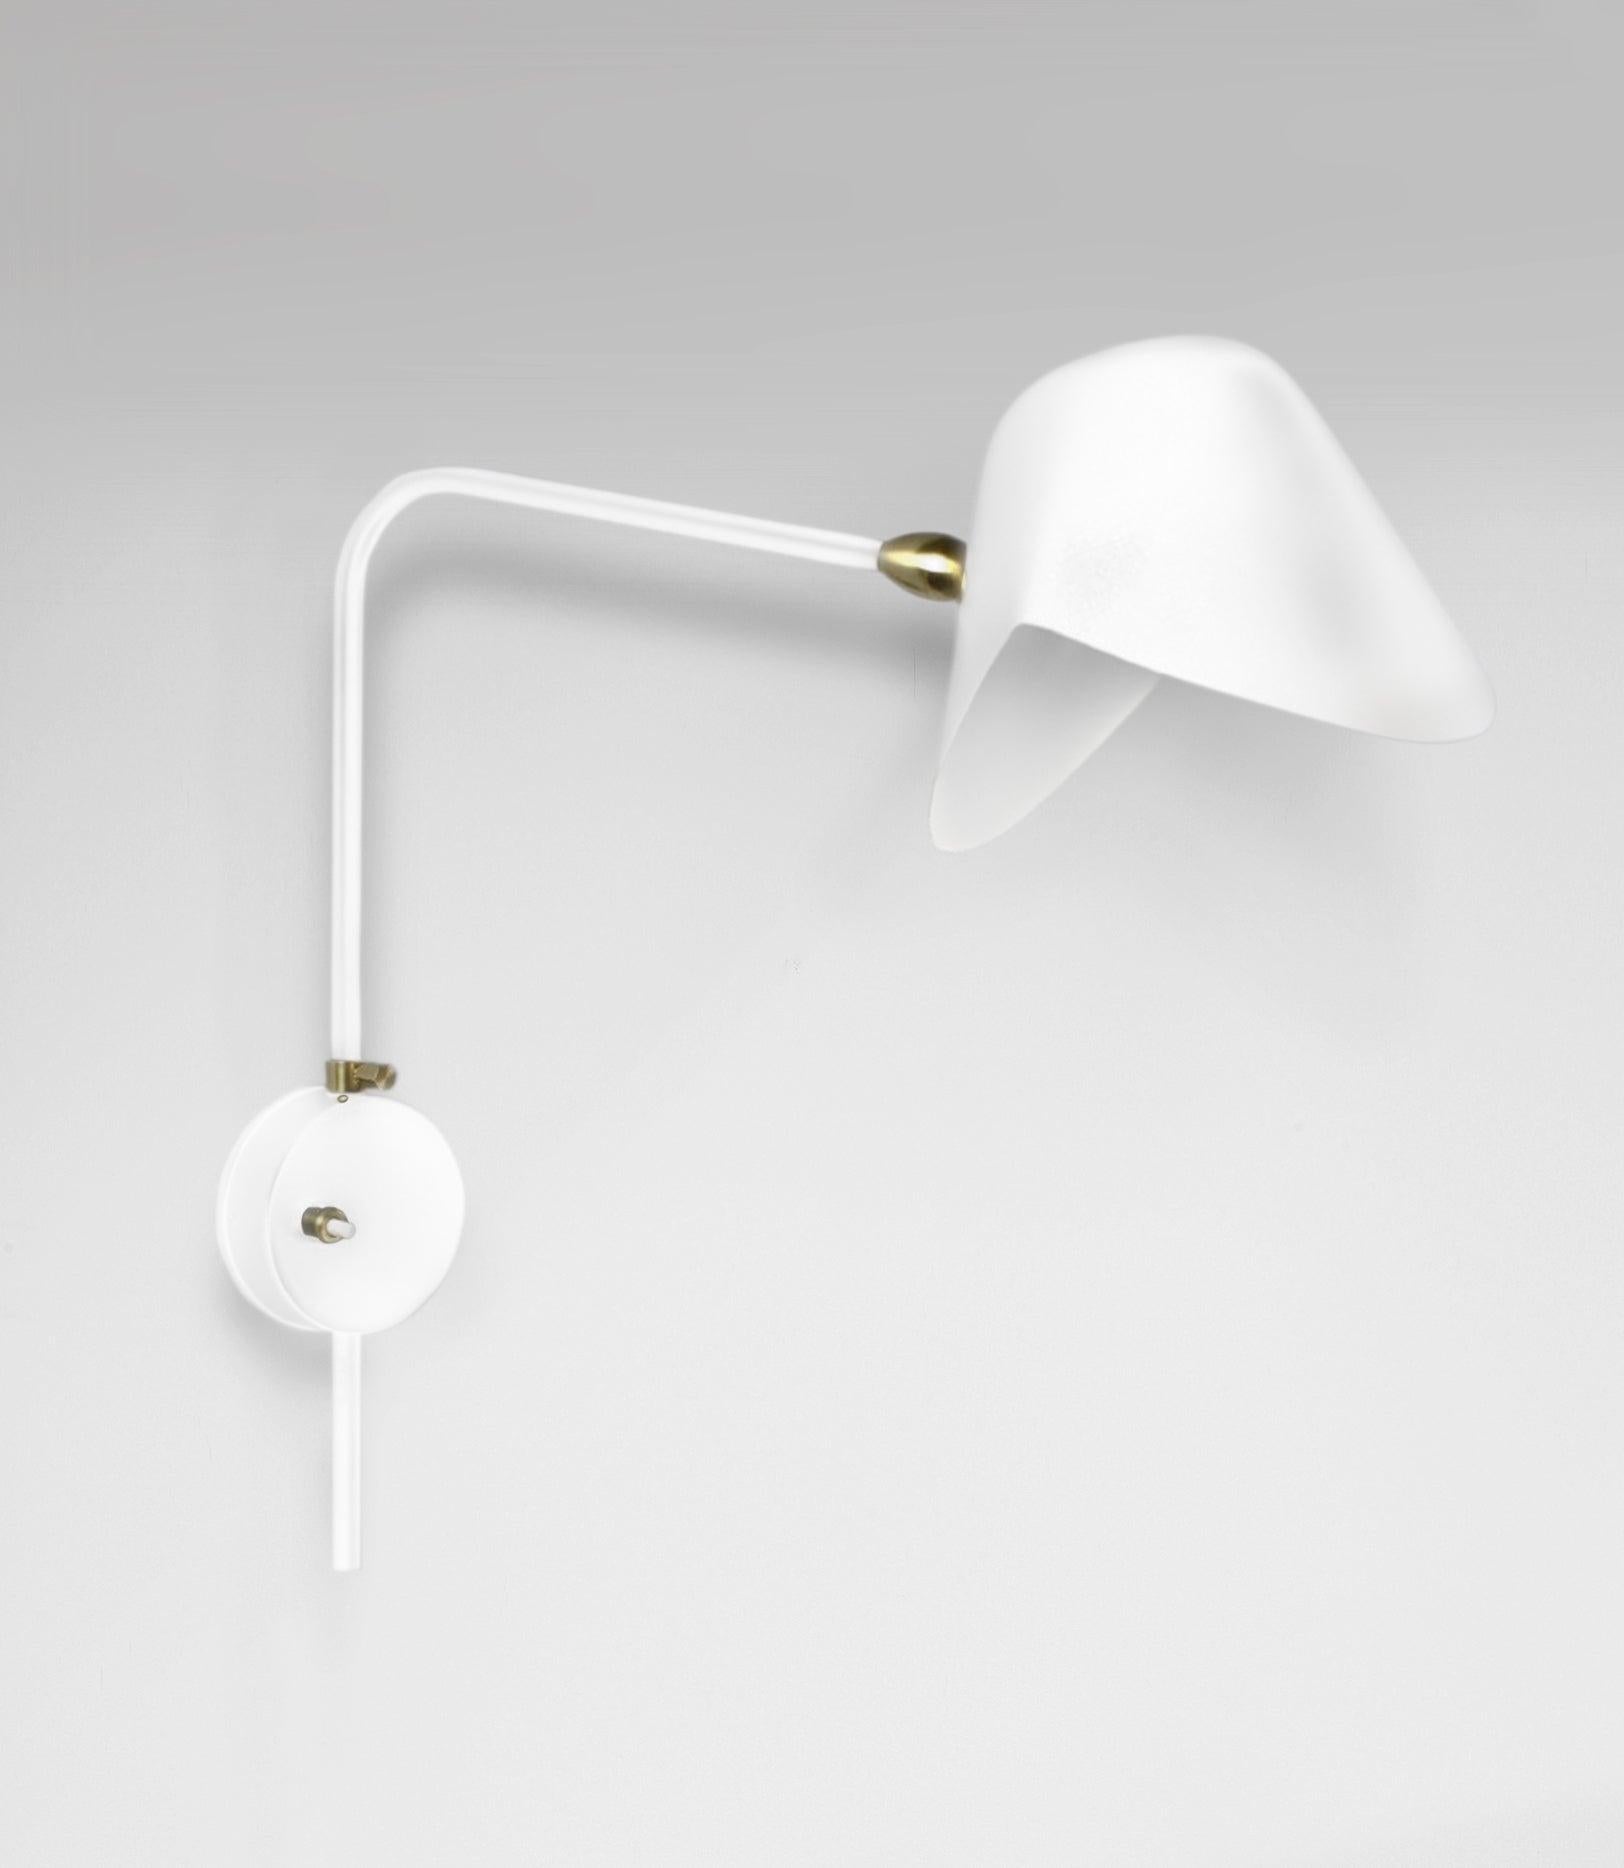 French Serge Mouille Mid-Century Modern White Anthony Wall Lamp with Round Fixation Box